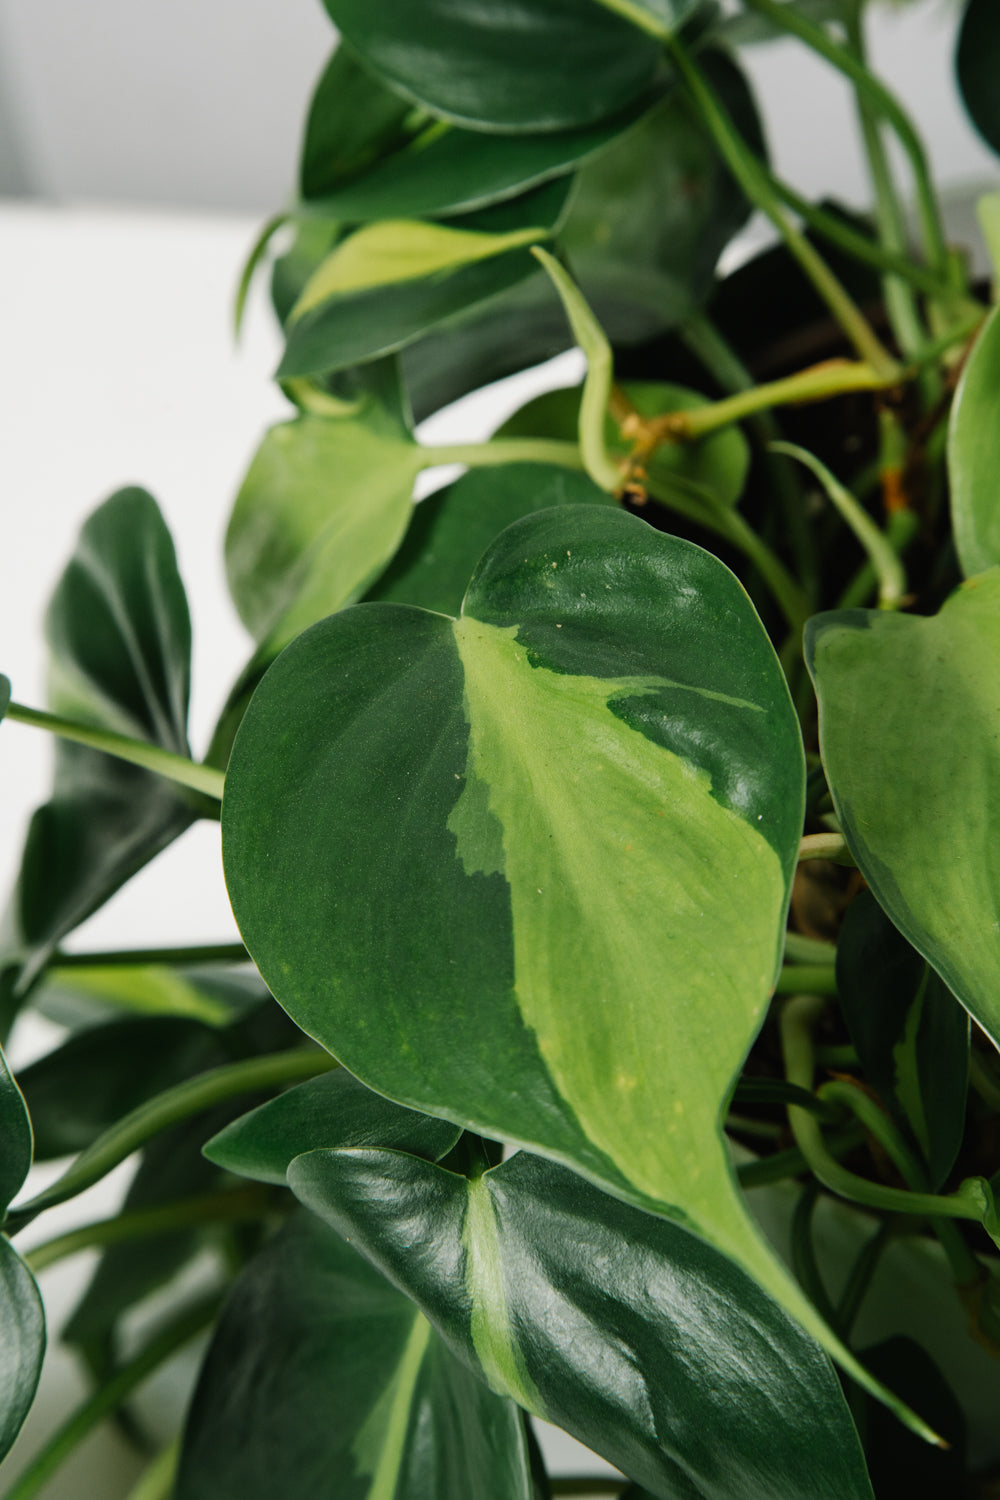 Philodendron Brazil Small